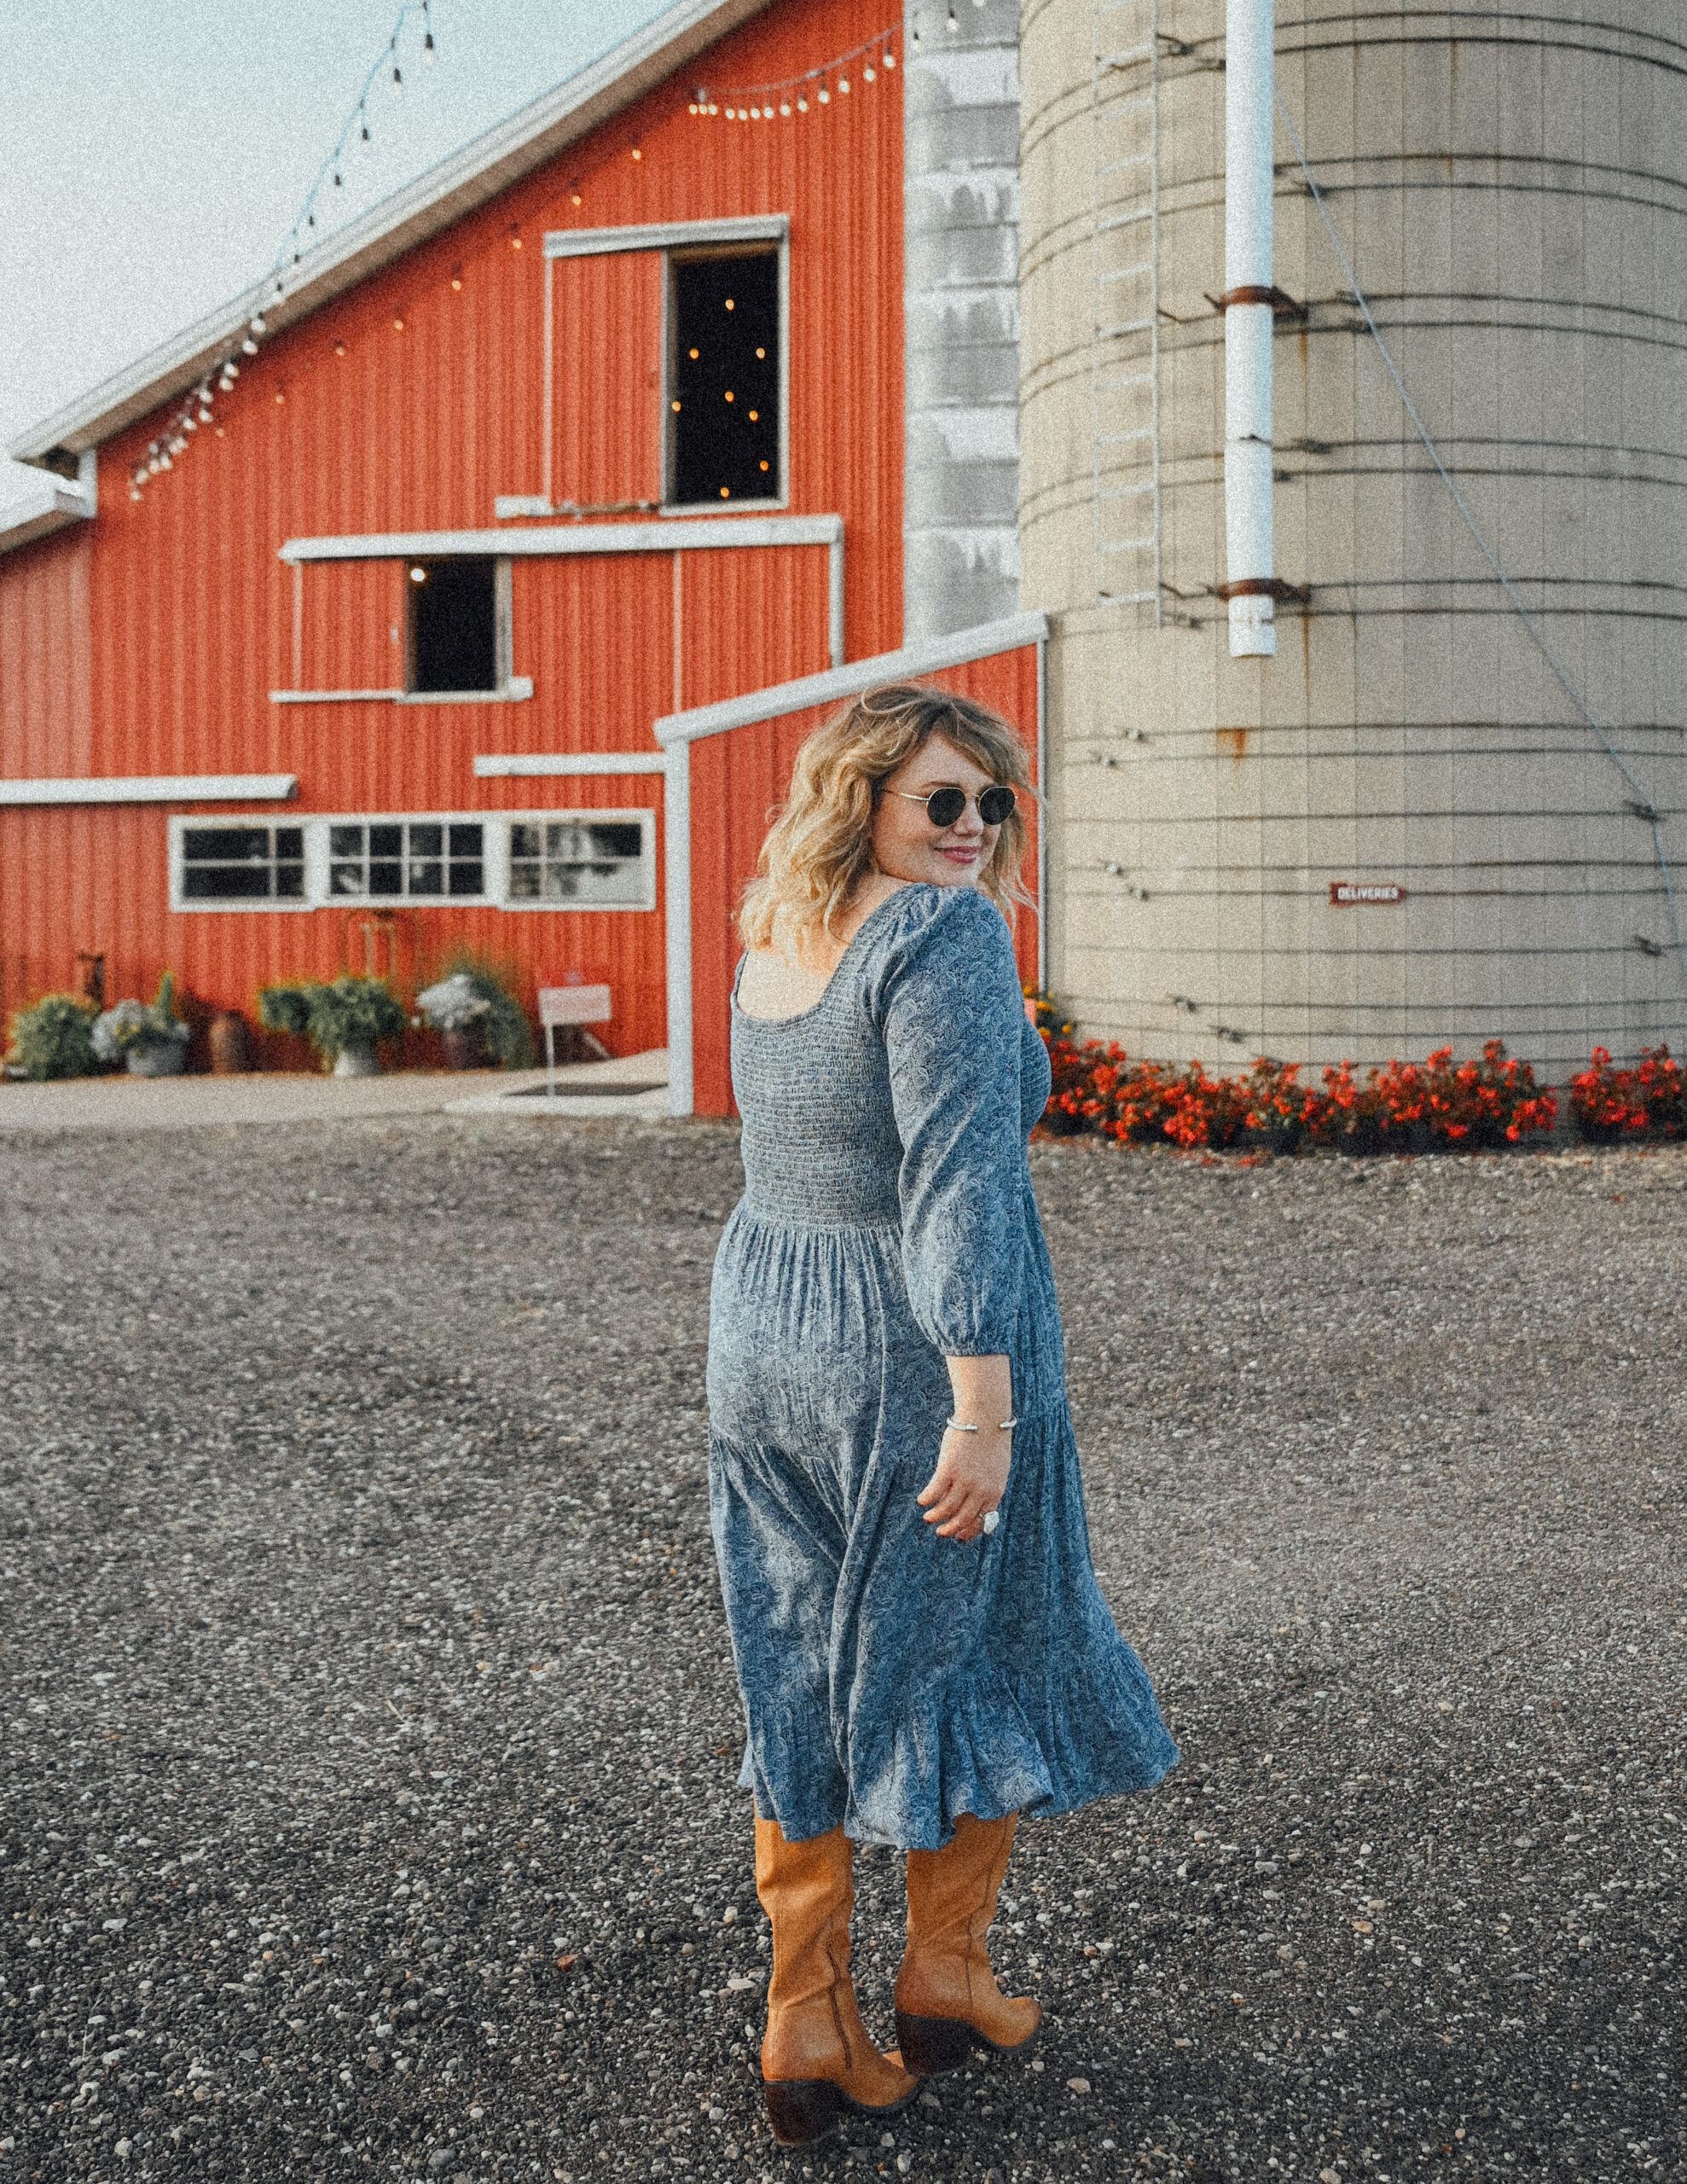 Fall dress, plus size fall dress, wide calf boots styled with a fall dress, blue smocked dress worn with tall boots.